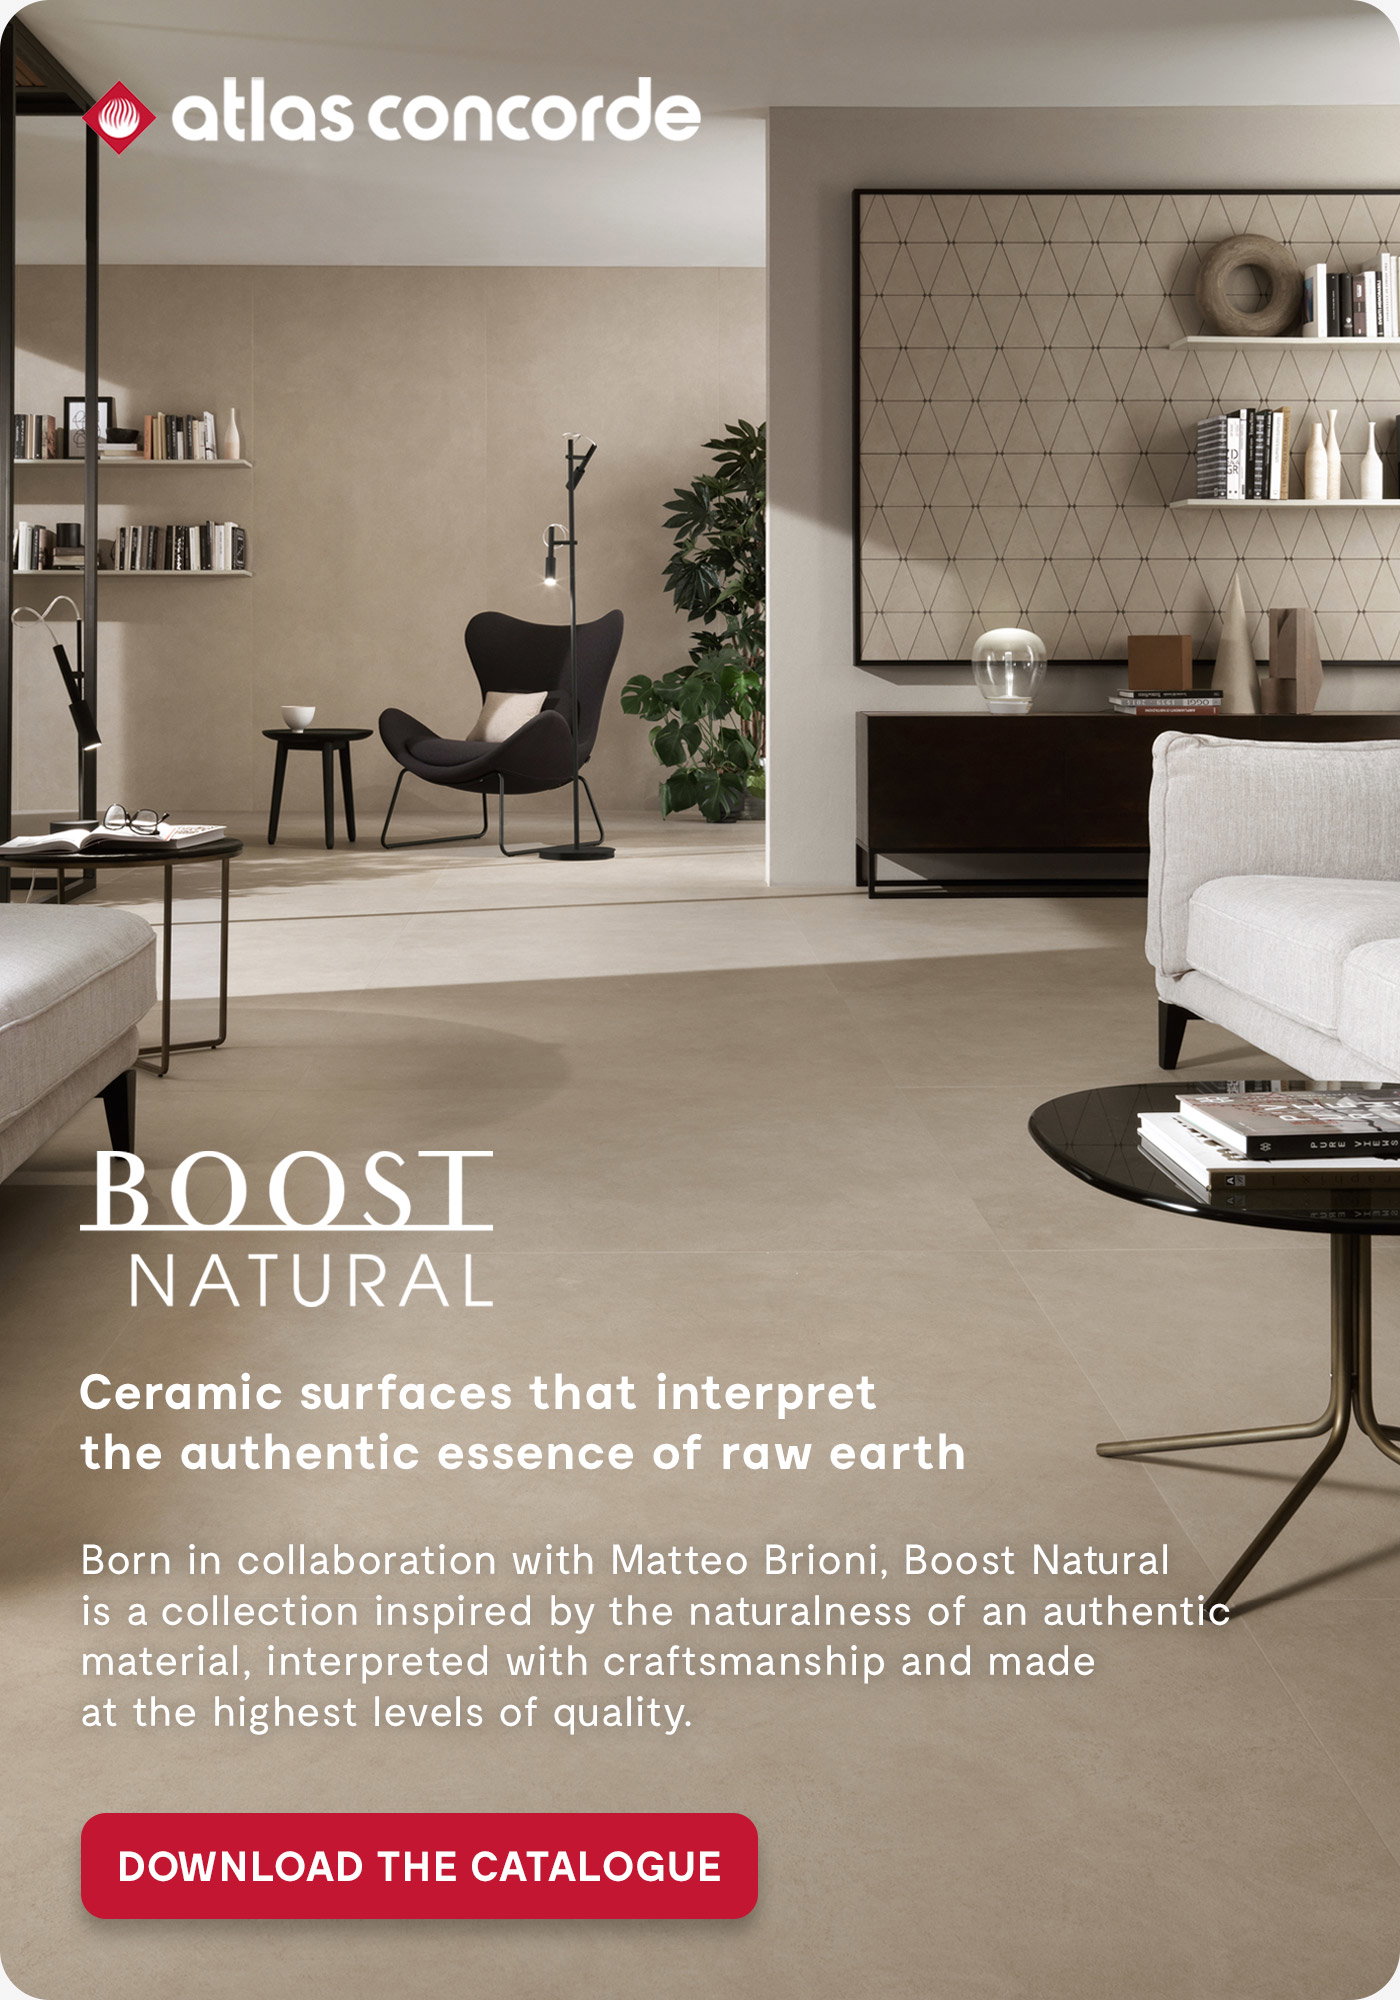 Archiproducts DE: Natural surfaces inspired by raw earth: Boost